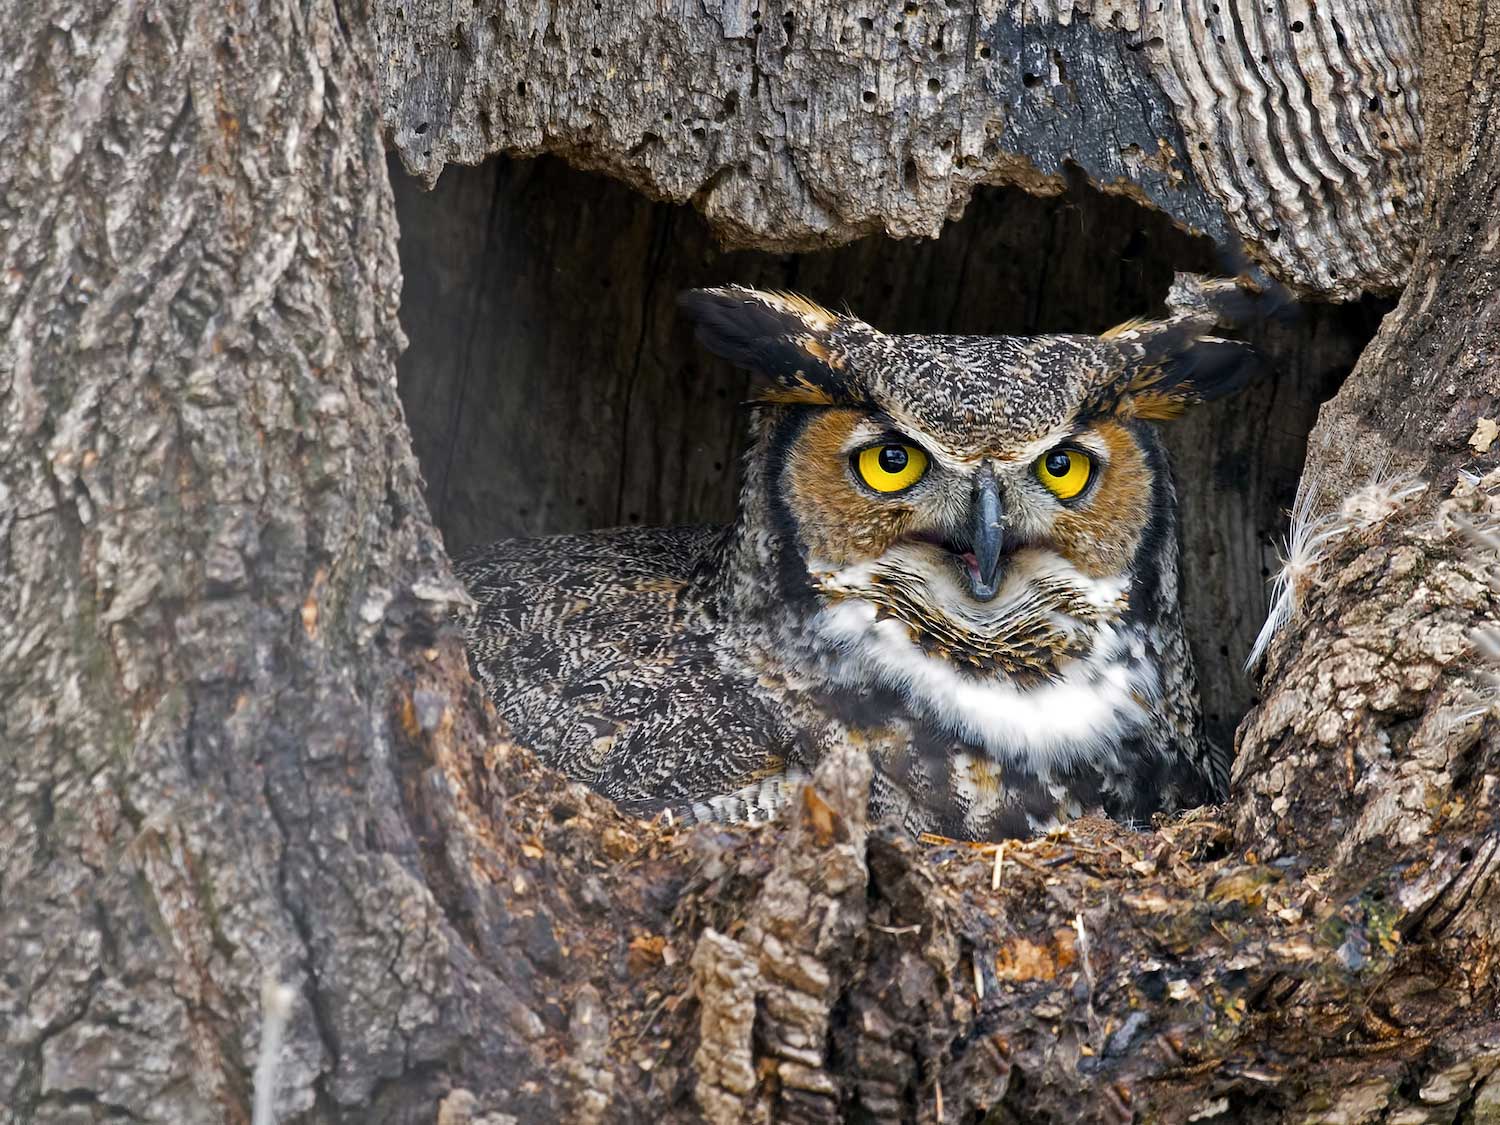 A great horned owl in a tree cavity.